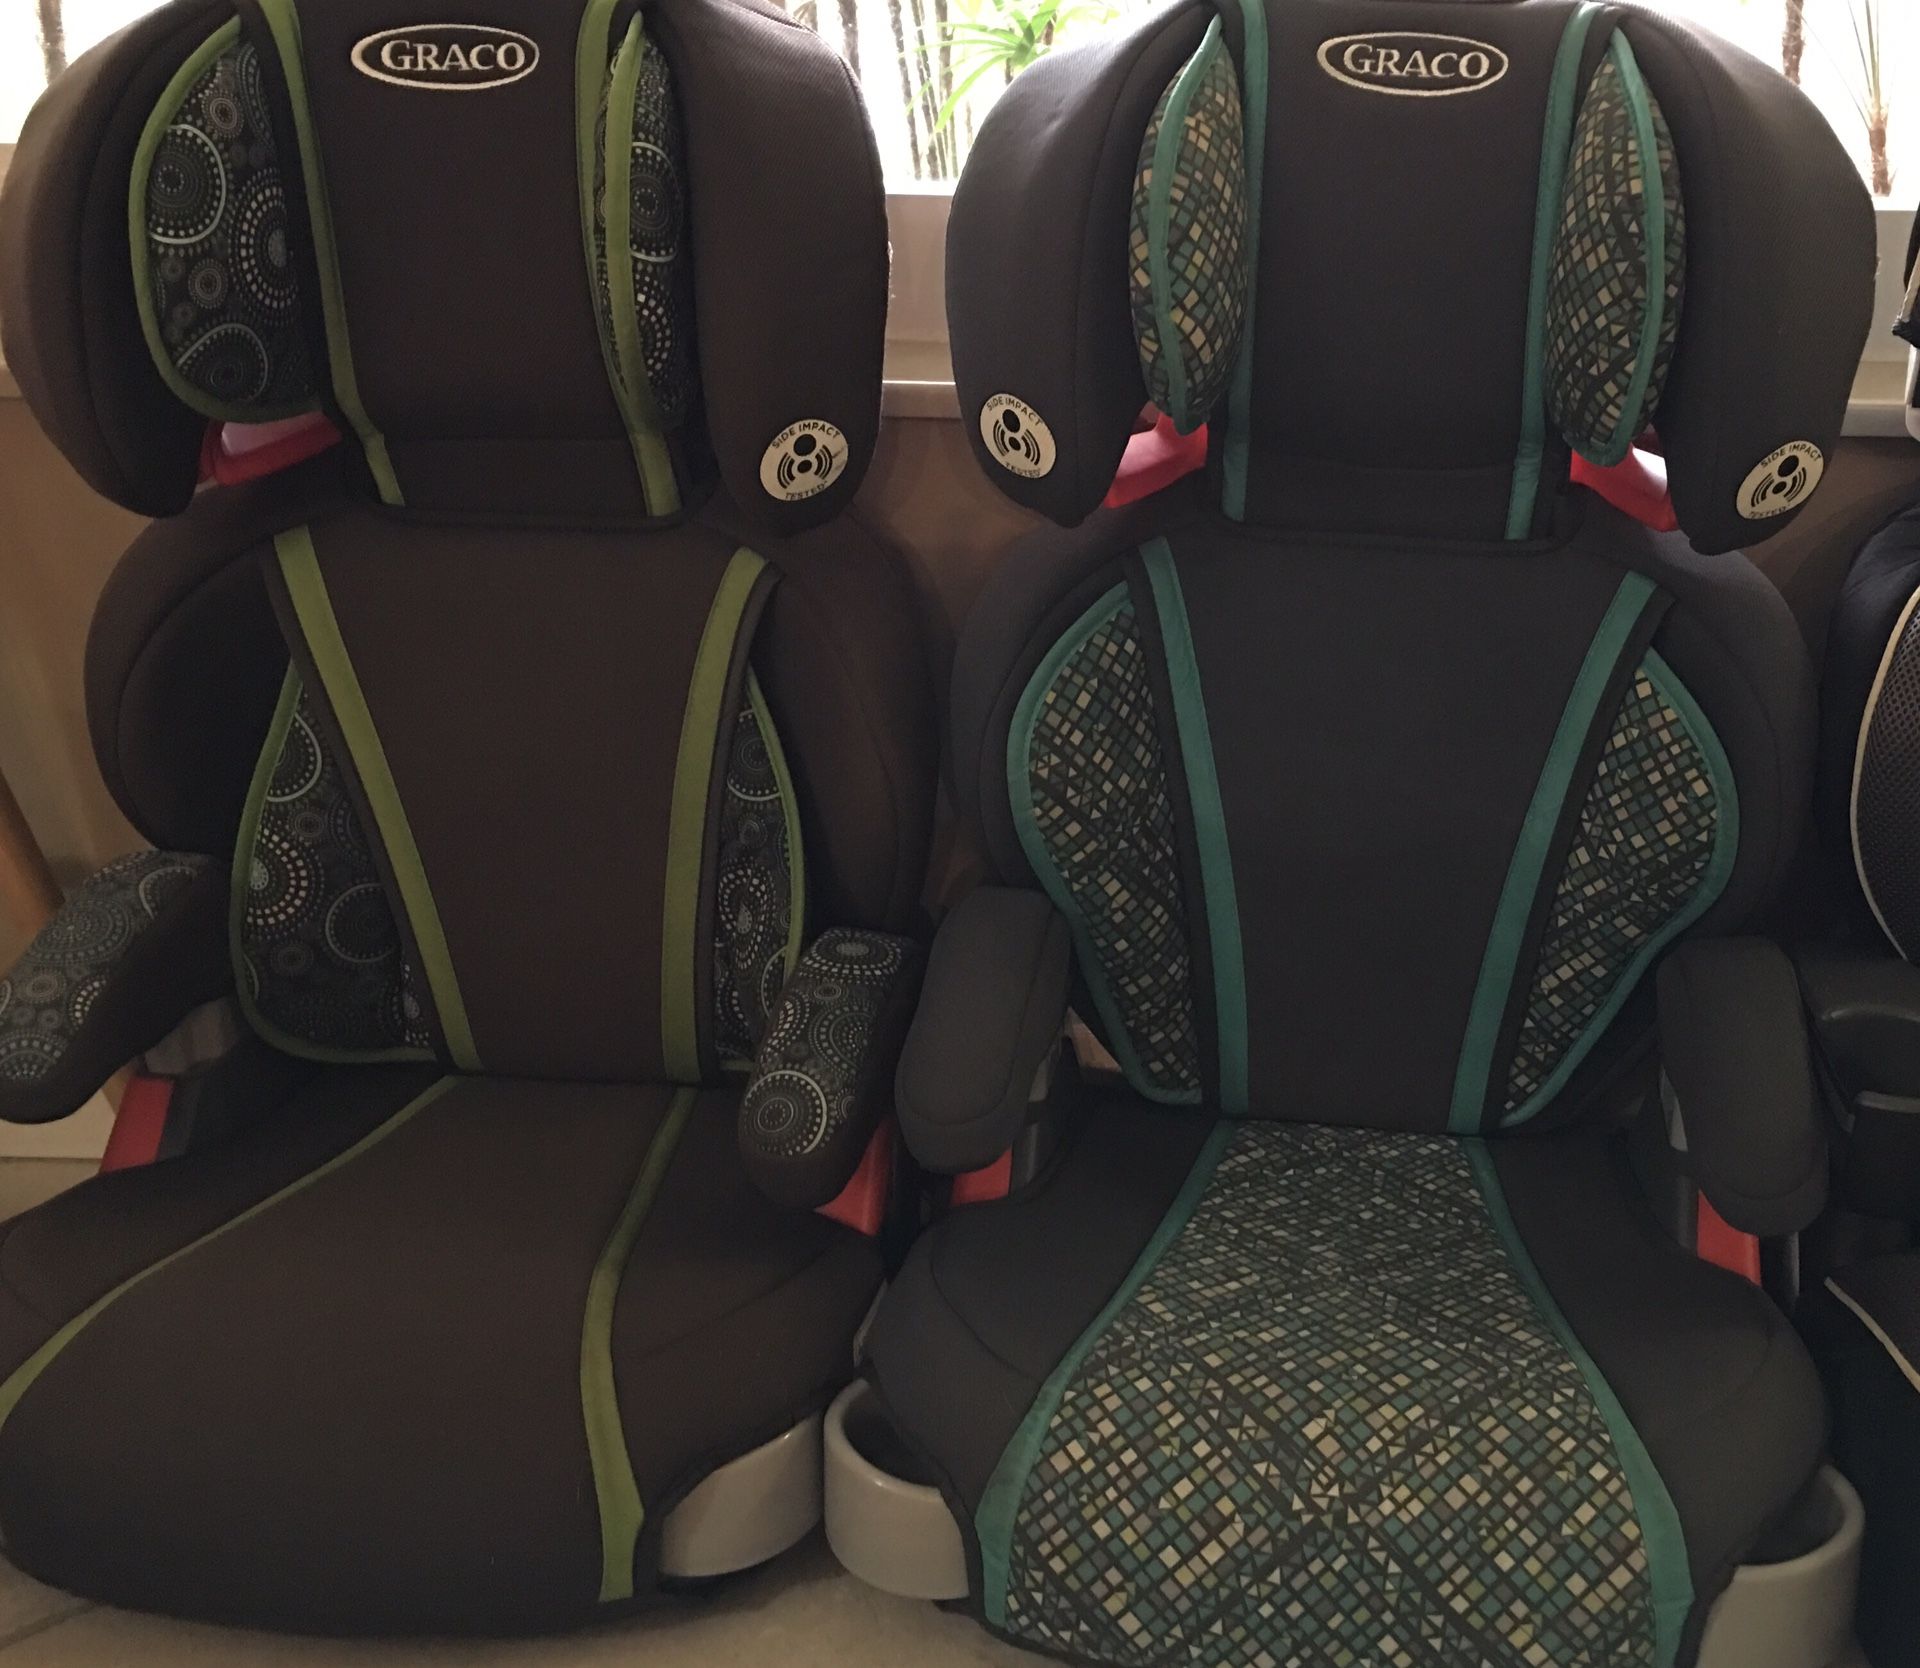 Two Graco booster seats